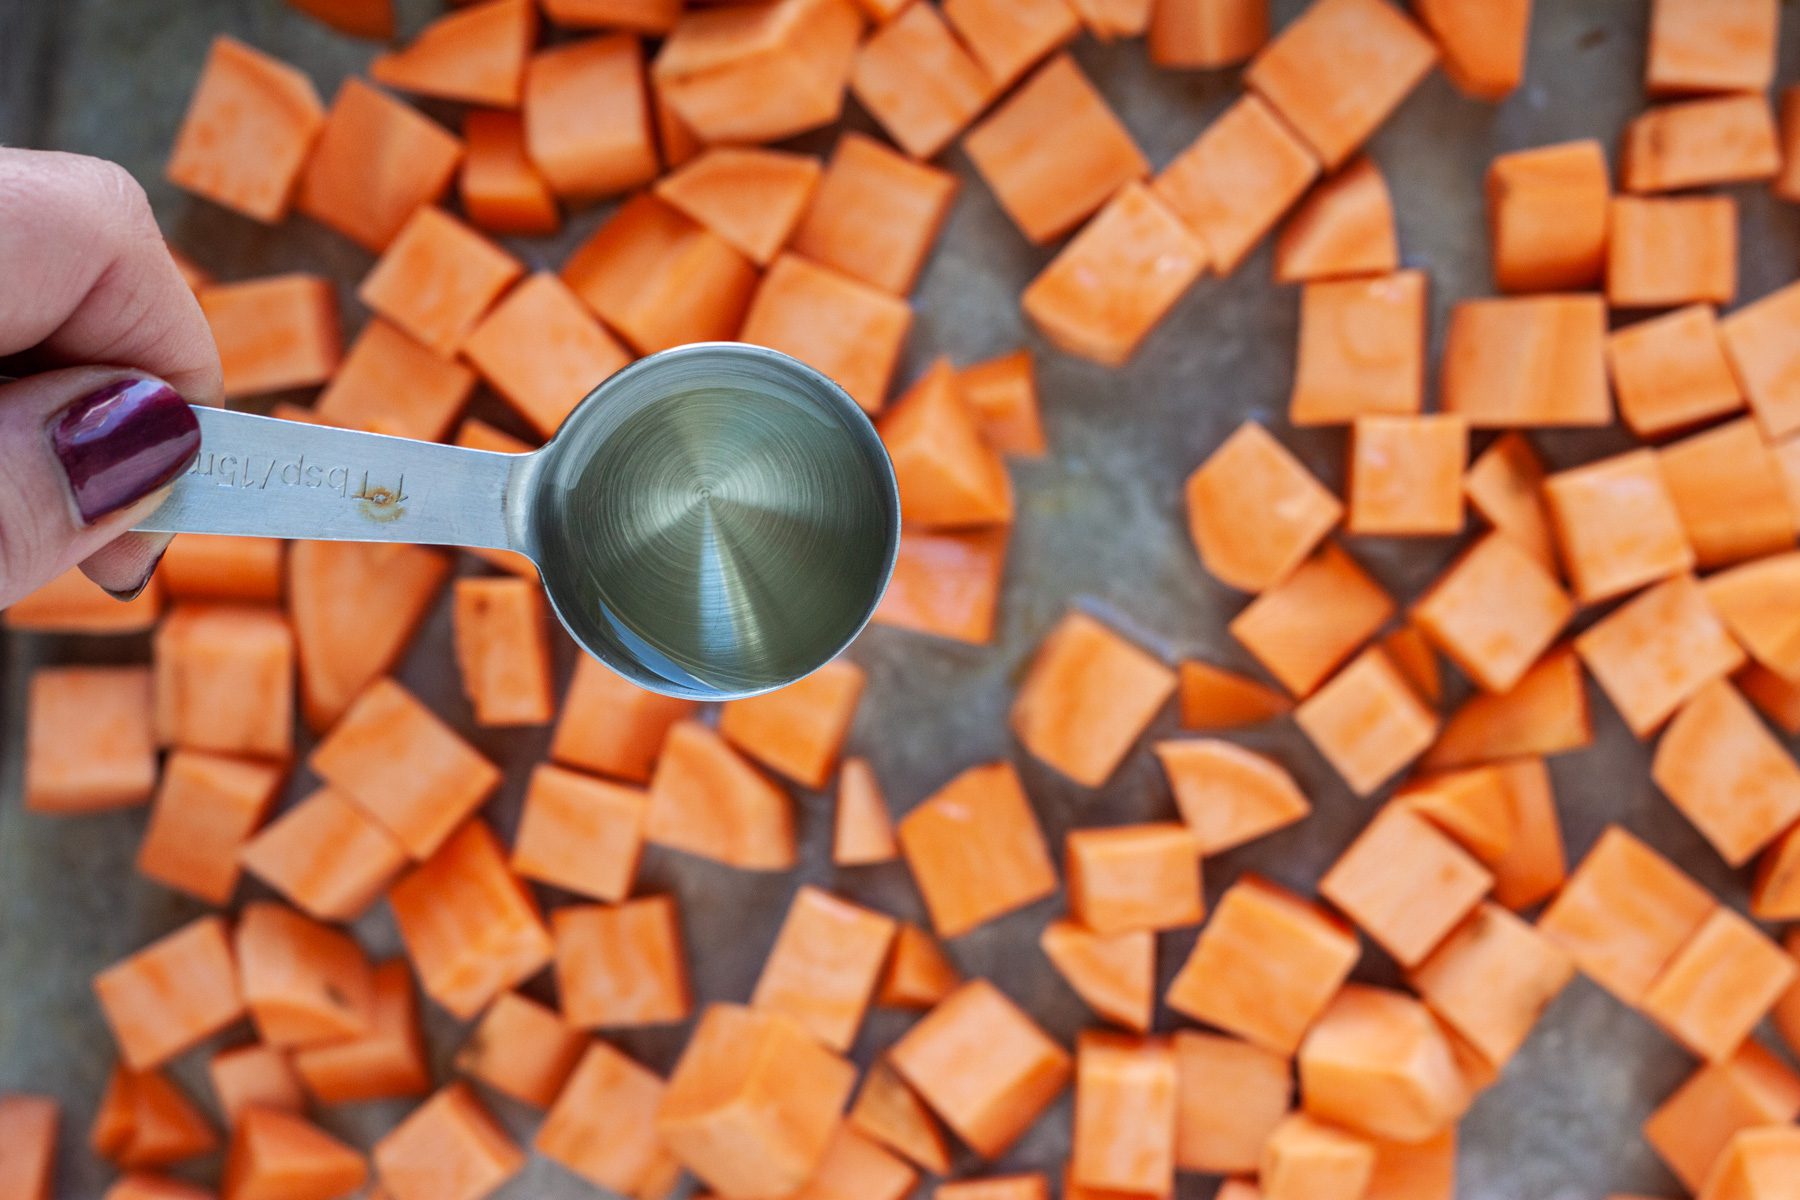 Add olive oil to sweet potatoes